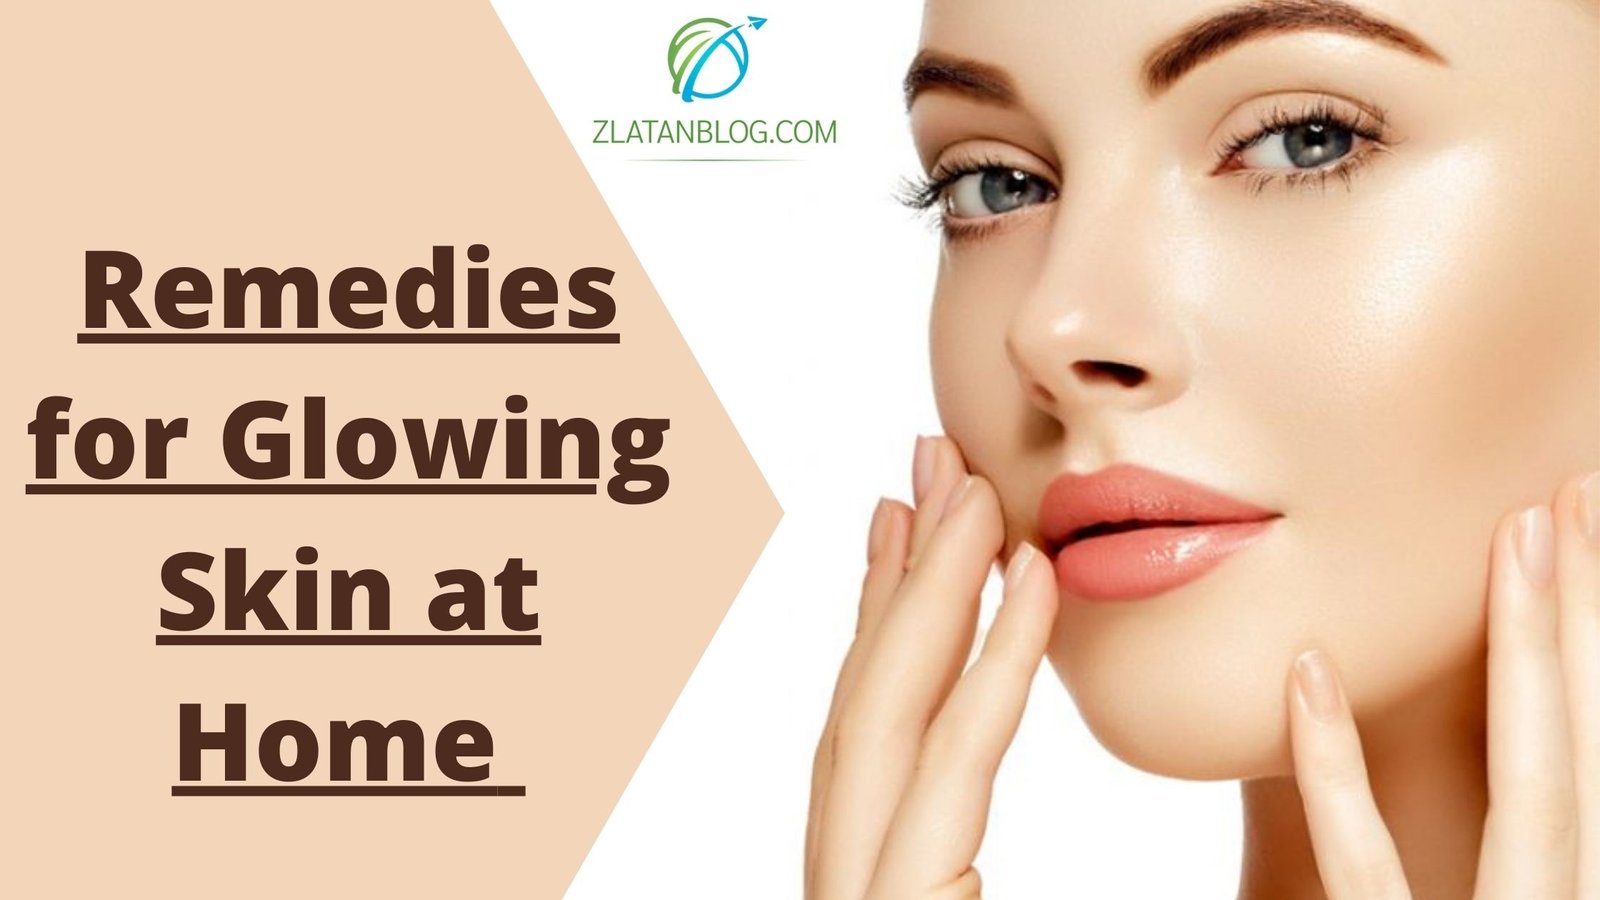 Remedies for Glowing Skin at Home